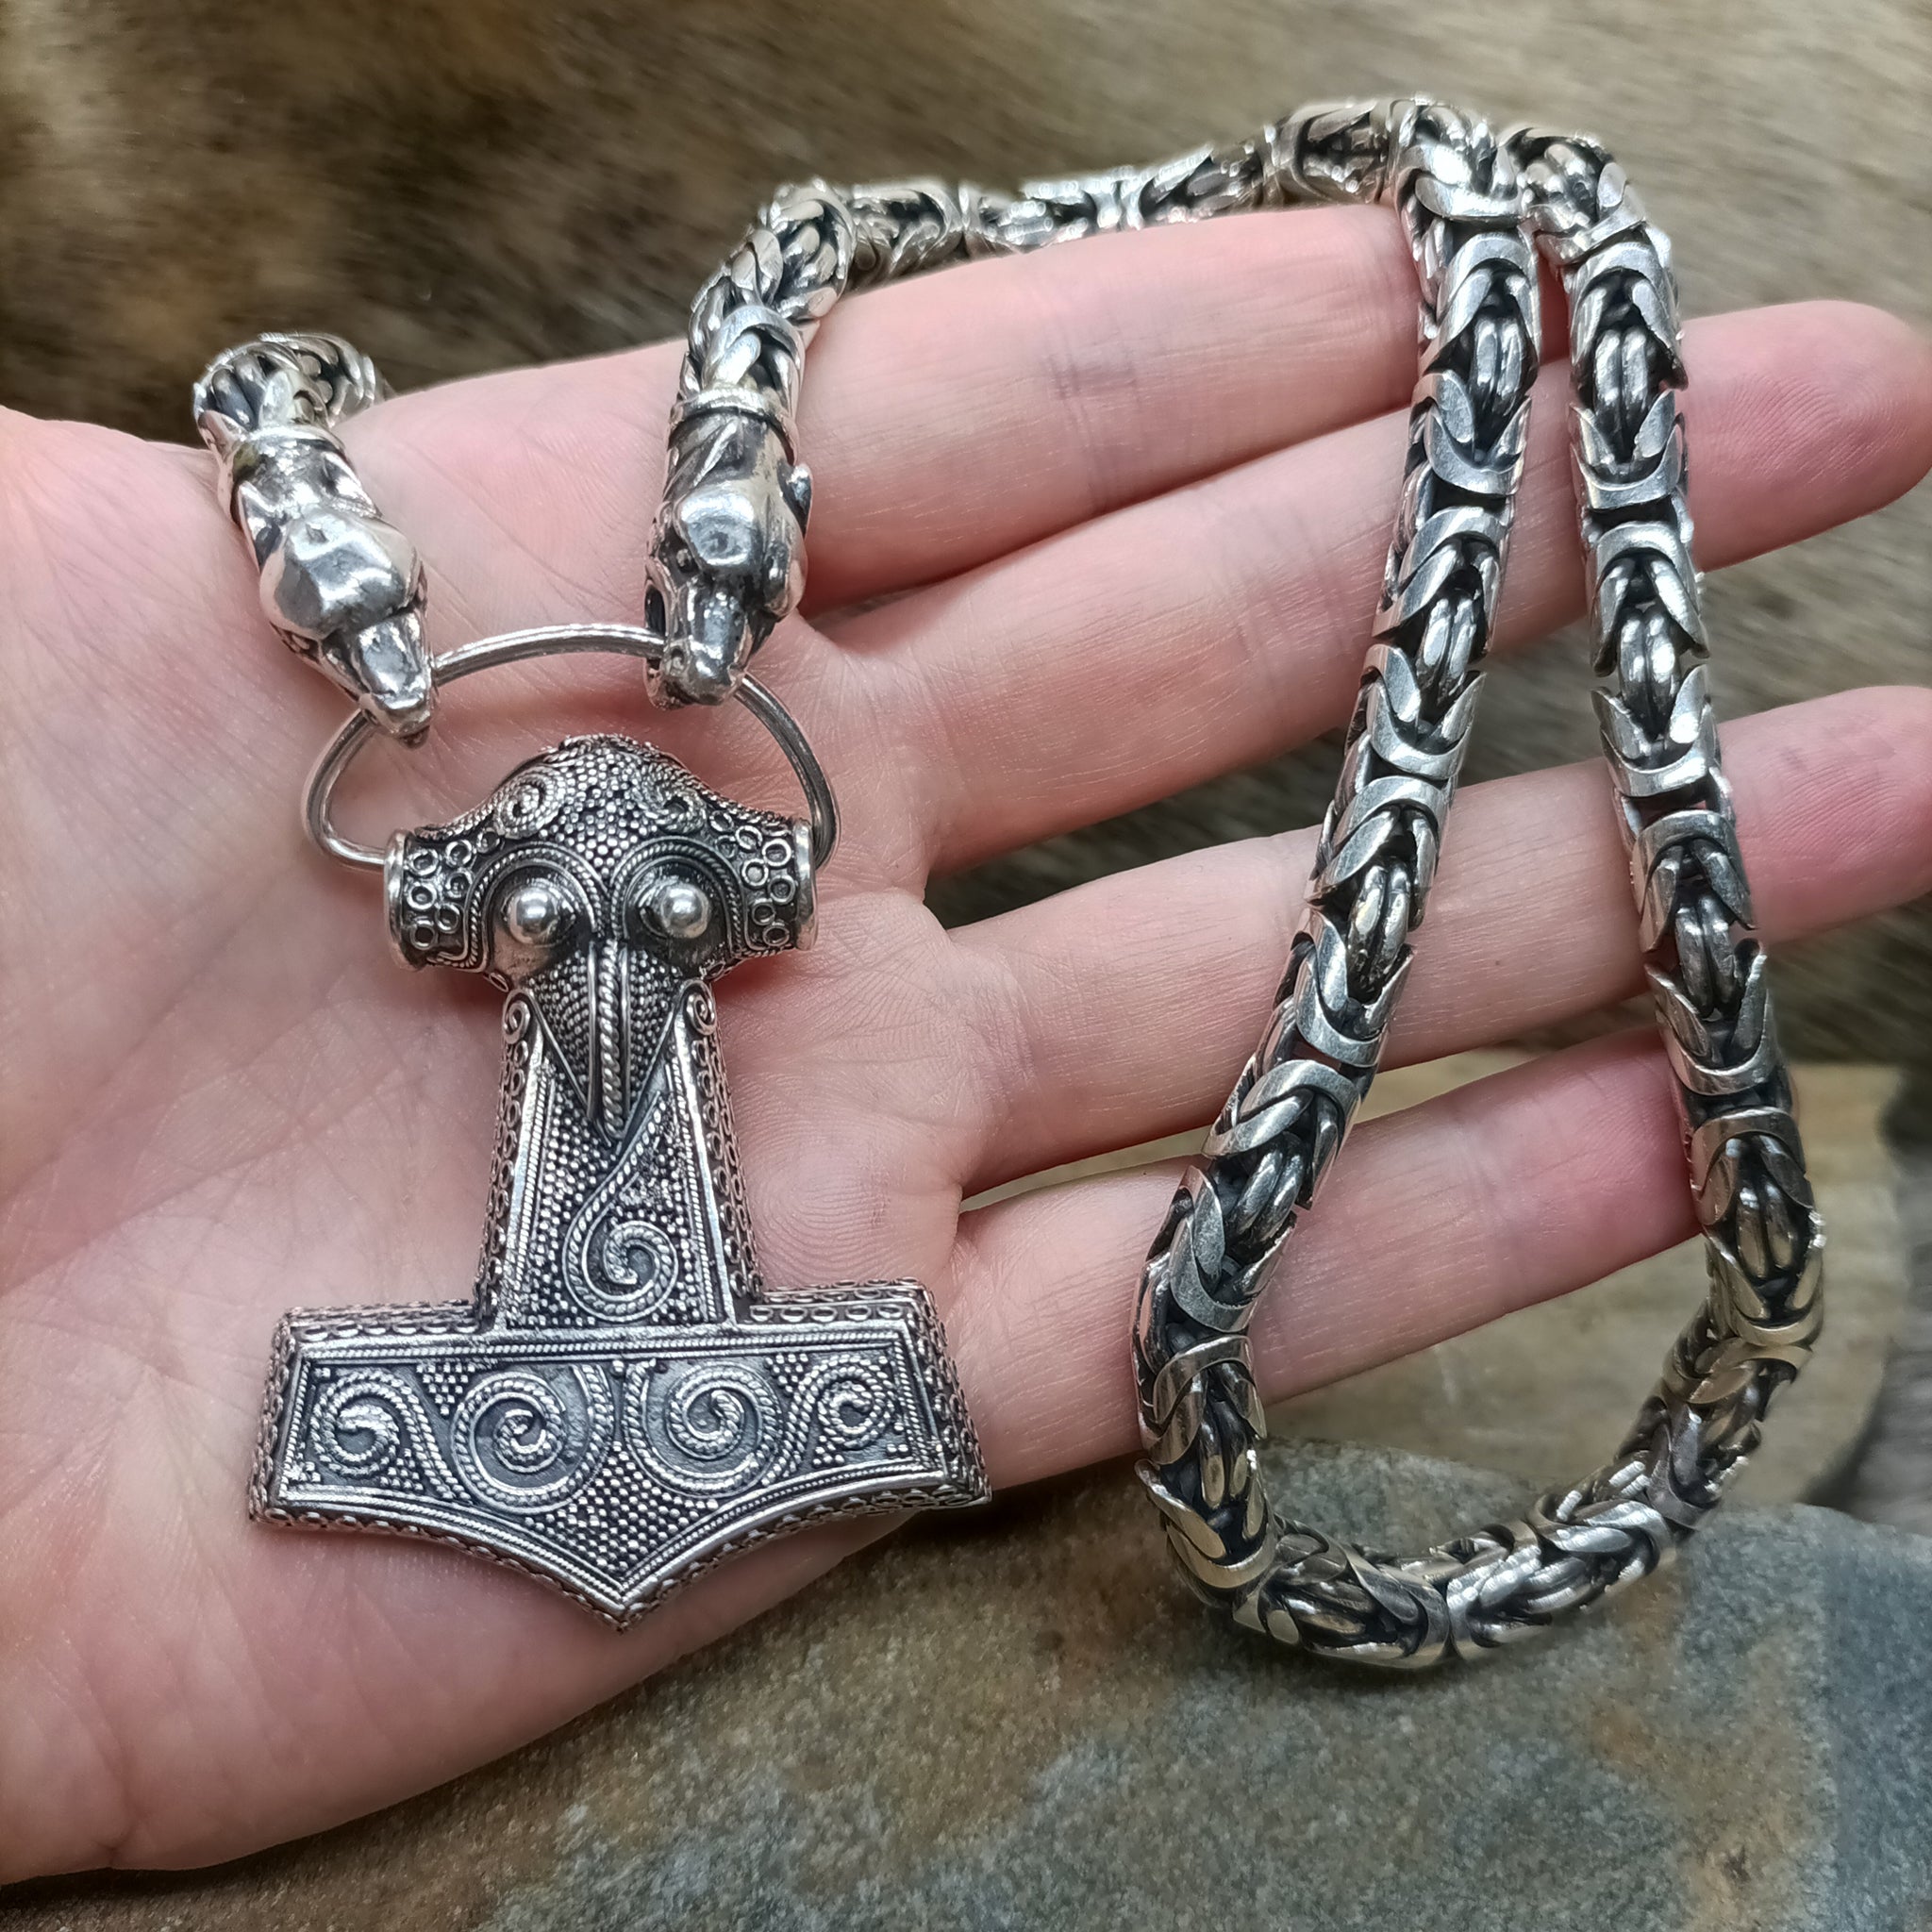 10mm Silver King Chain Necklace with Ferocious Wolf Heads with Large Silver Kabara Hammer Pendant on Hand